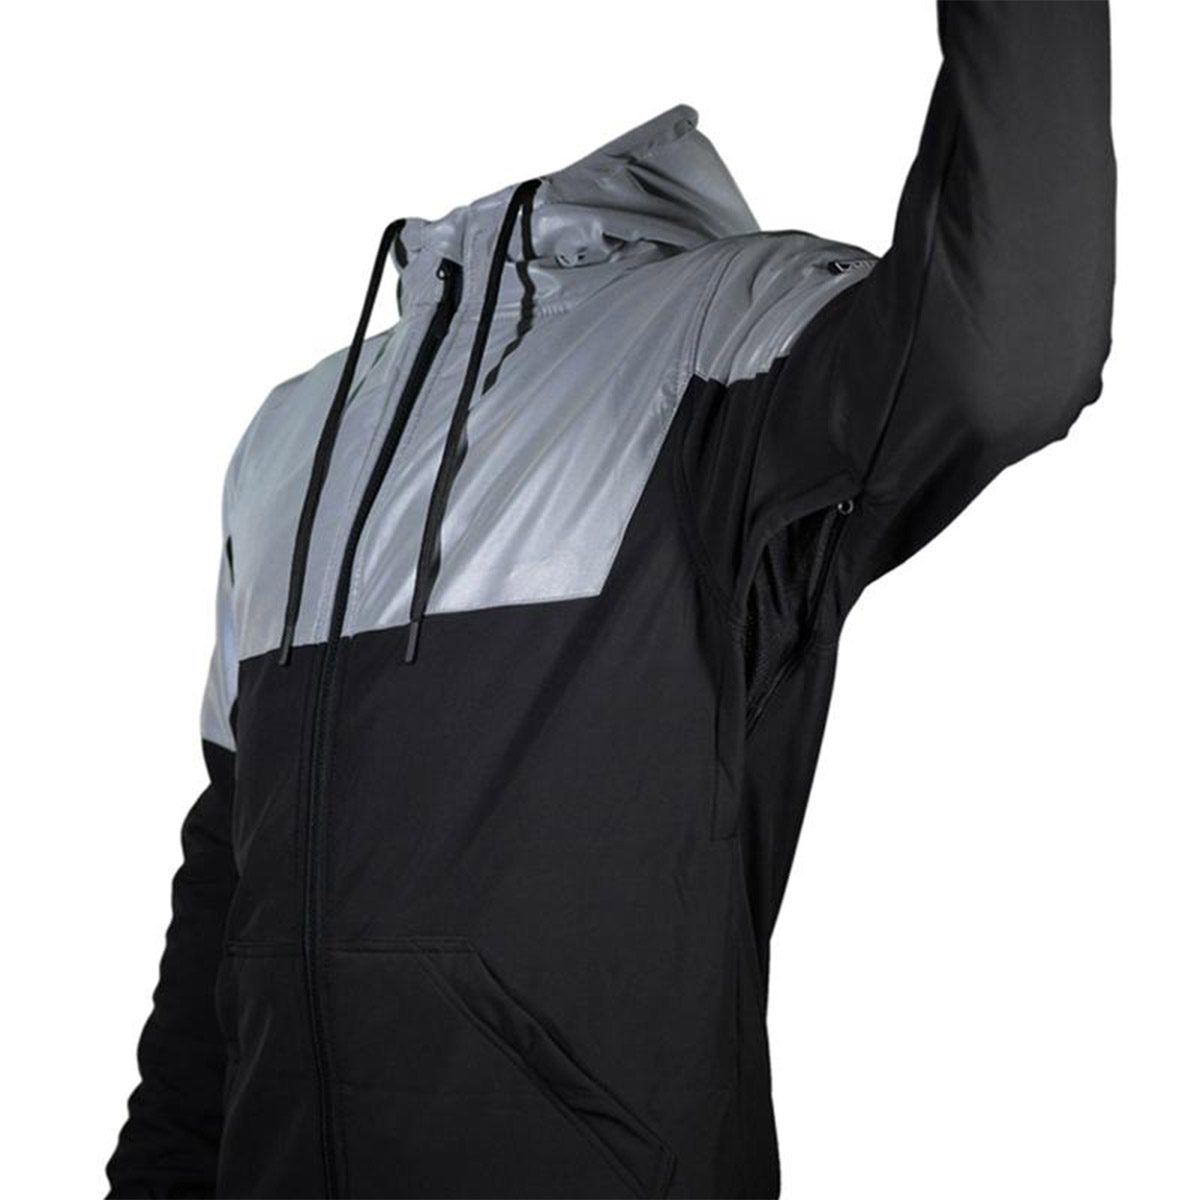 Reflective Jacket Armored LAZYROLLING, 47% OFF